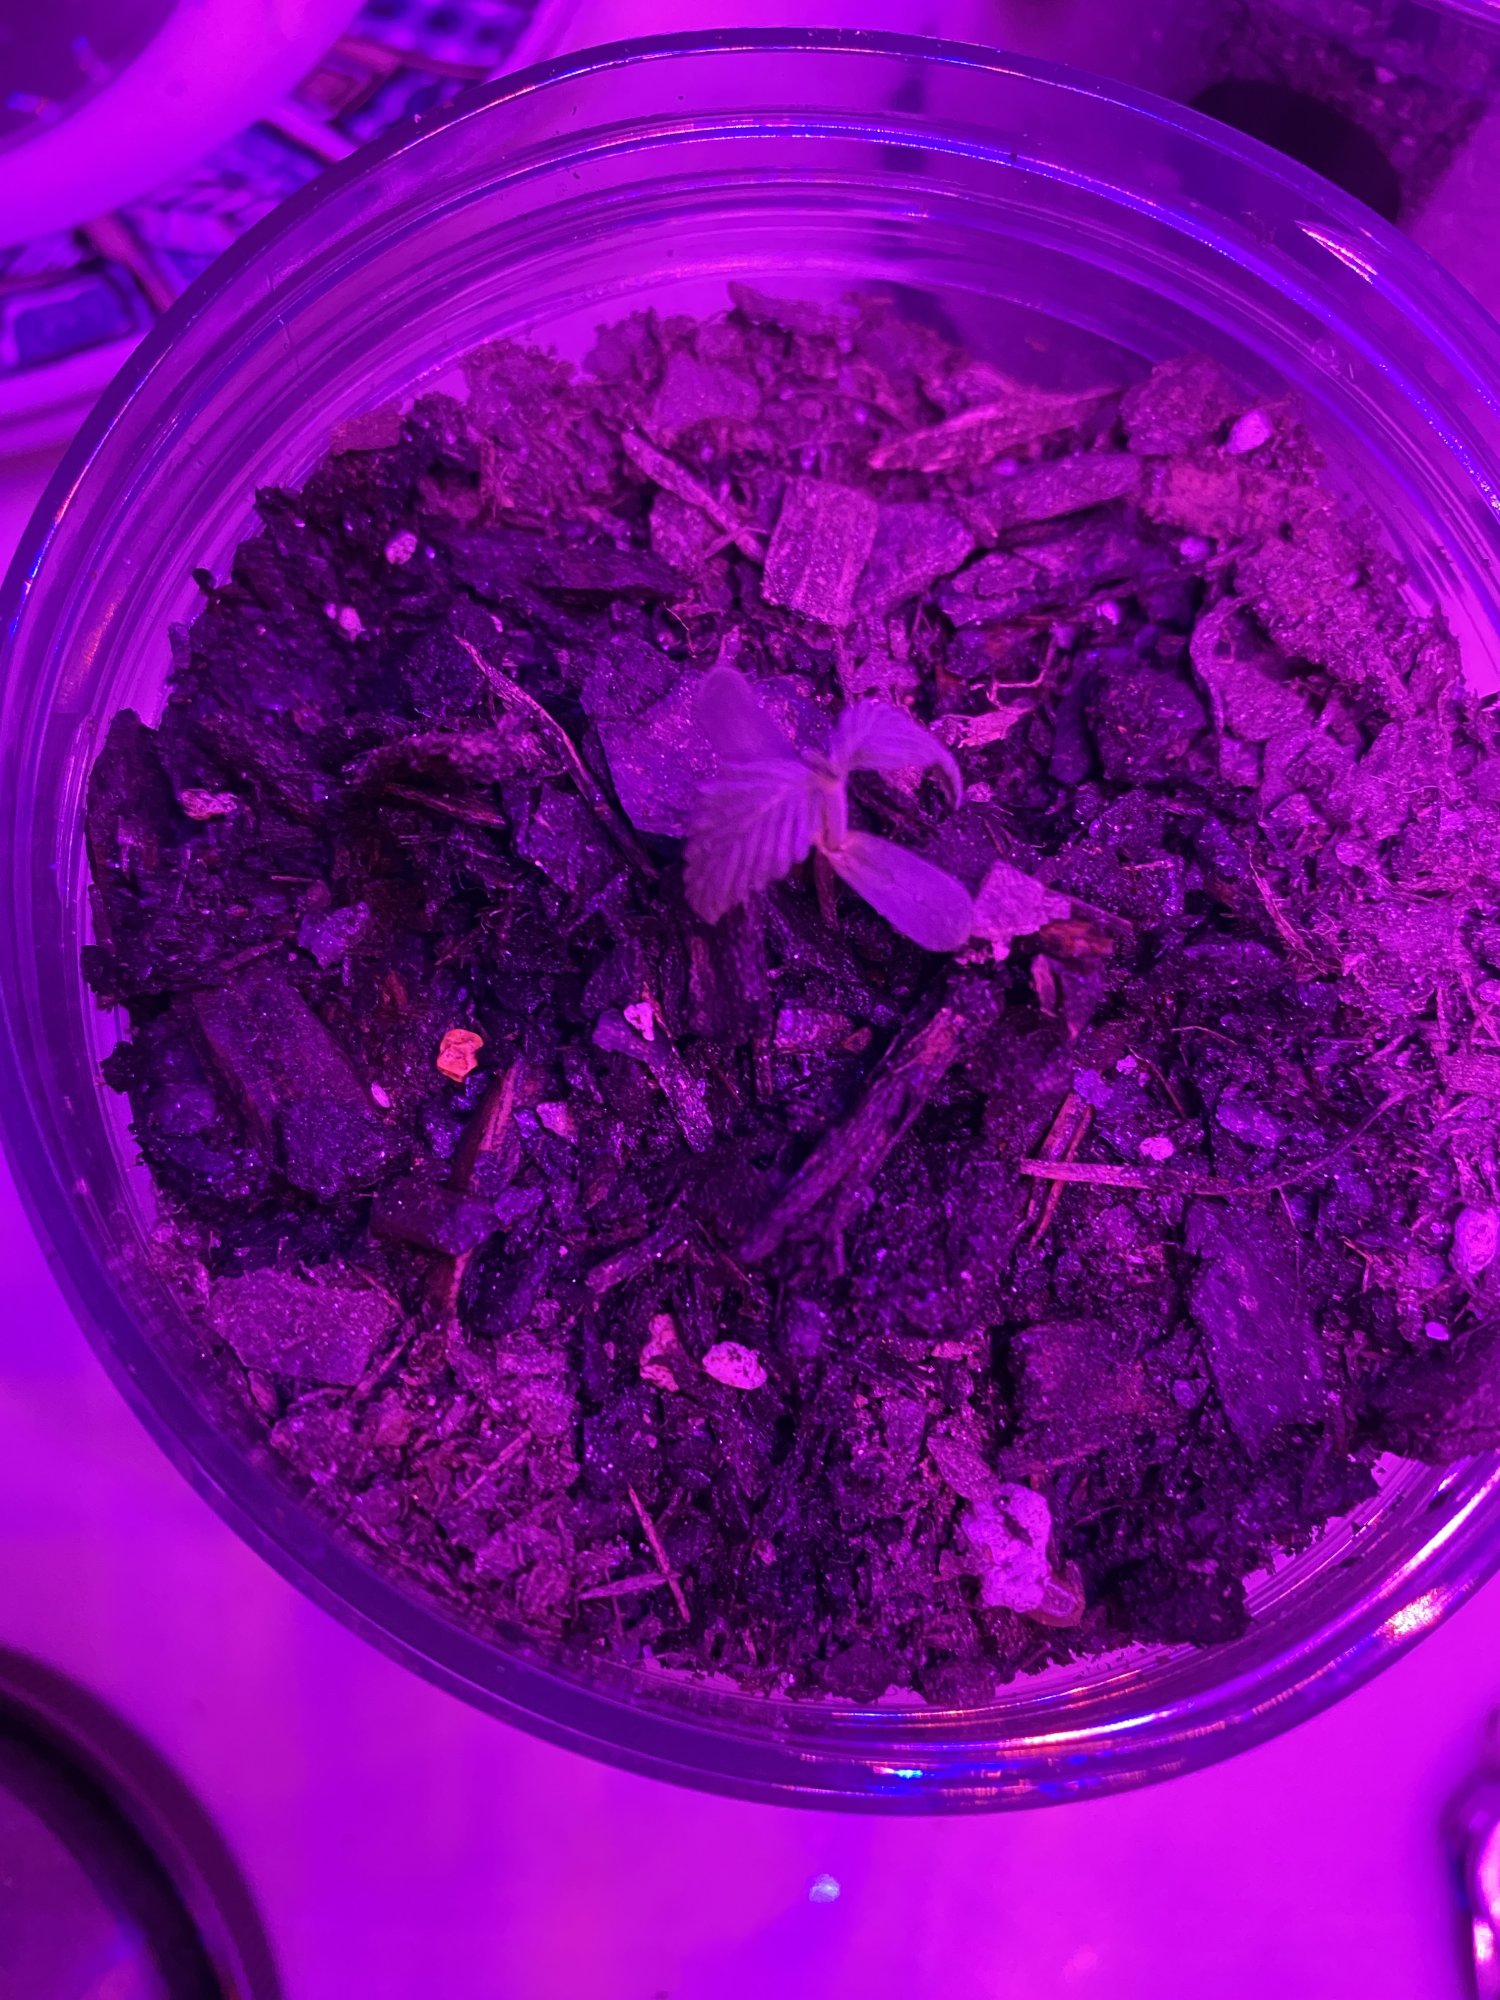 My seedling looks like its dying  any ideas why 4